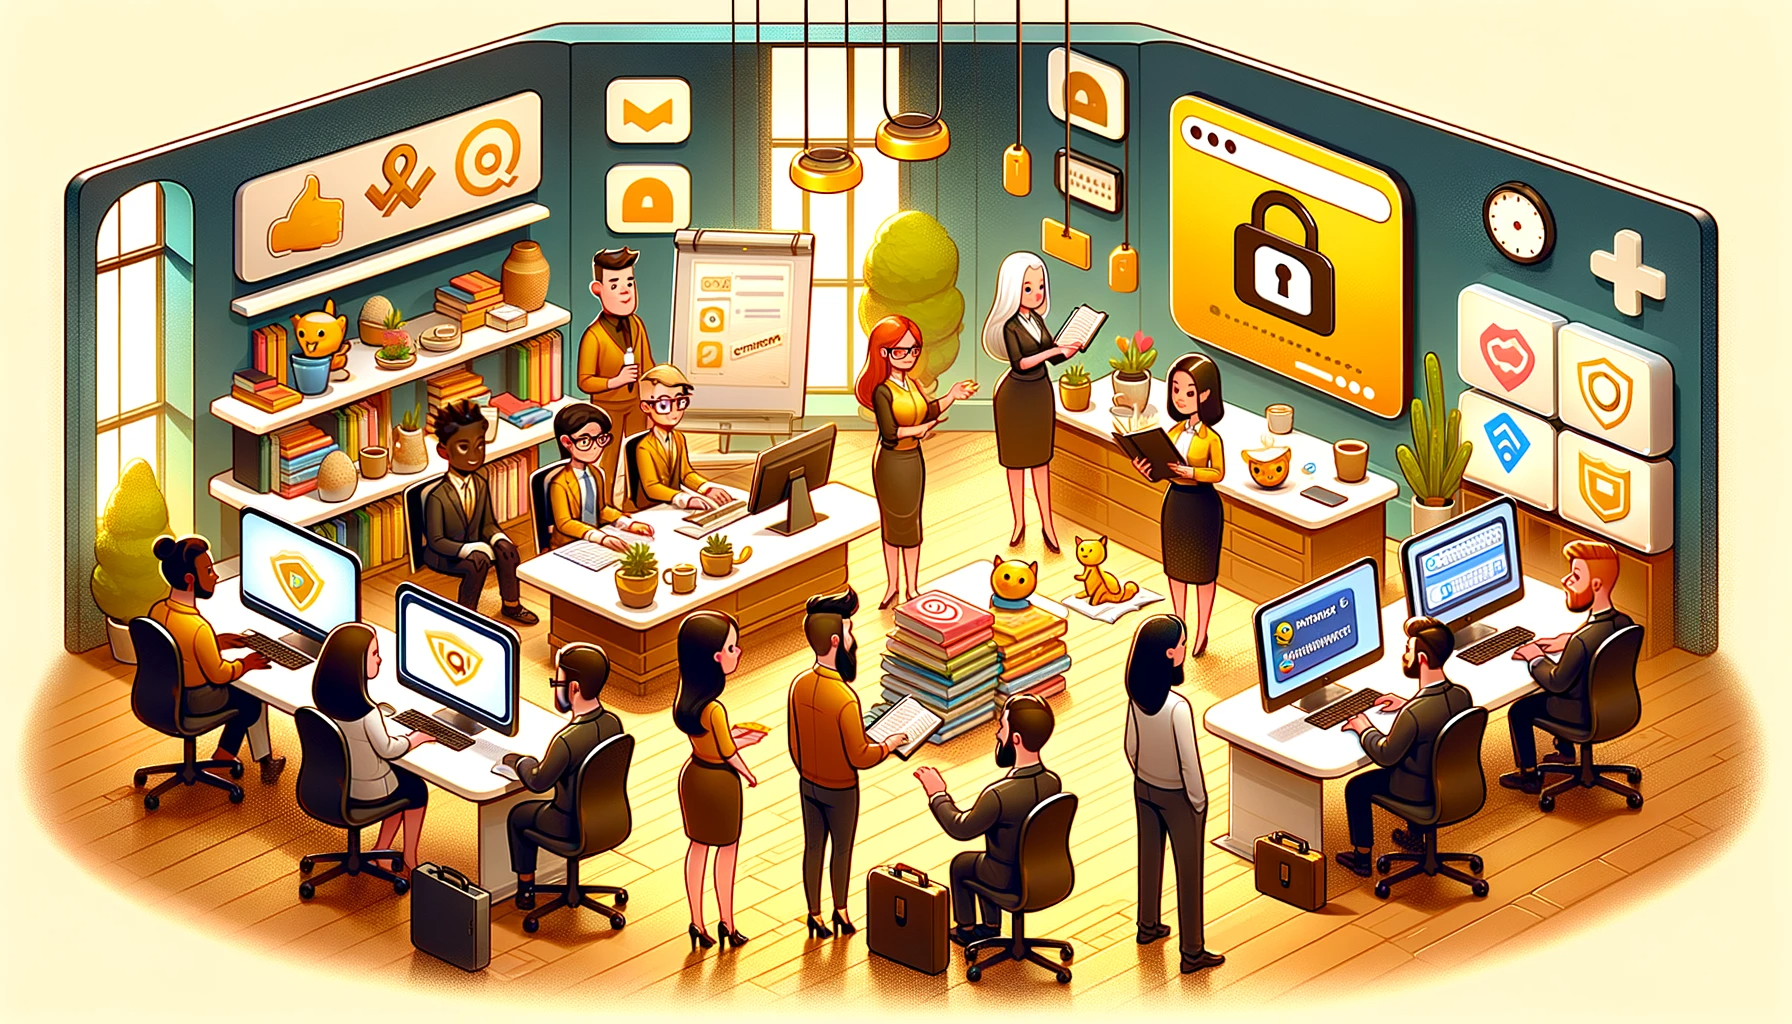 A digital illustration for a blog post, showing a diverse group of Q-version cartoon characters engaged in various activities to enhance cybersecurity awareness. The characters are shown in a bright, inviting office environment, with some characters learning from books and monitors, another character giving a presentation on cybersecurity, and others discussing secure password practices. The scene is depicted in warm coffee and yellow tones to create a welcoming and educational atmosphere, emphasizing the importance of cybersecurity training. The characters are diverse in terms of gender and ethnicity. This image is designed in a 16:9 aspect ratio suitable for article headers or social media posts.